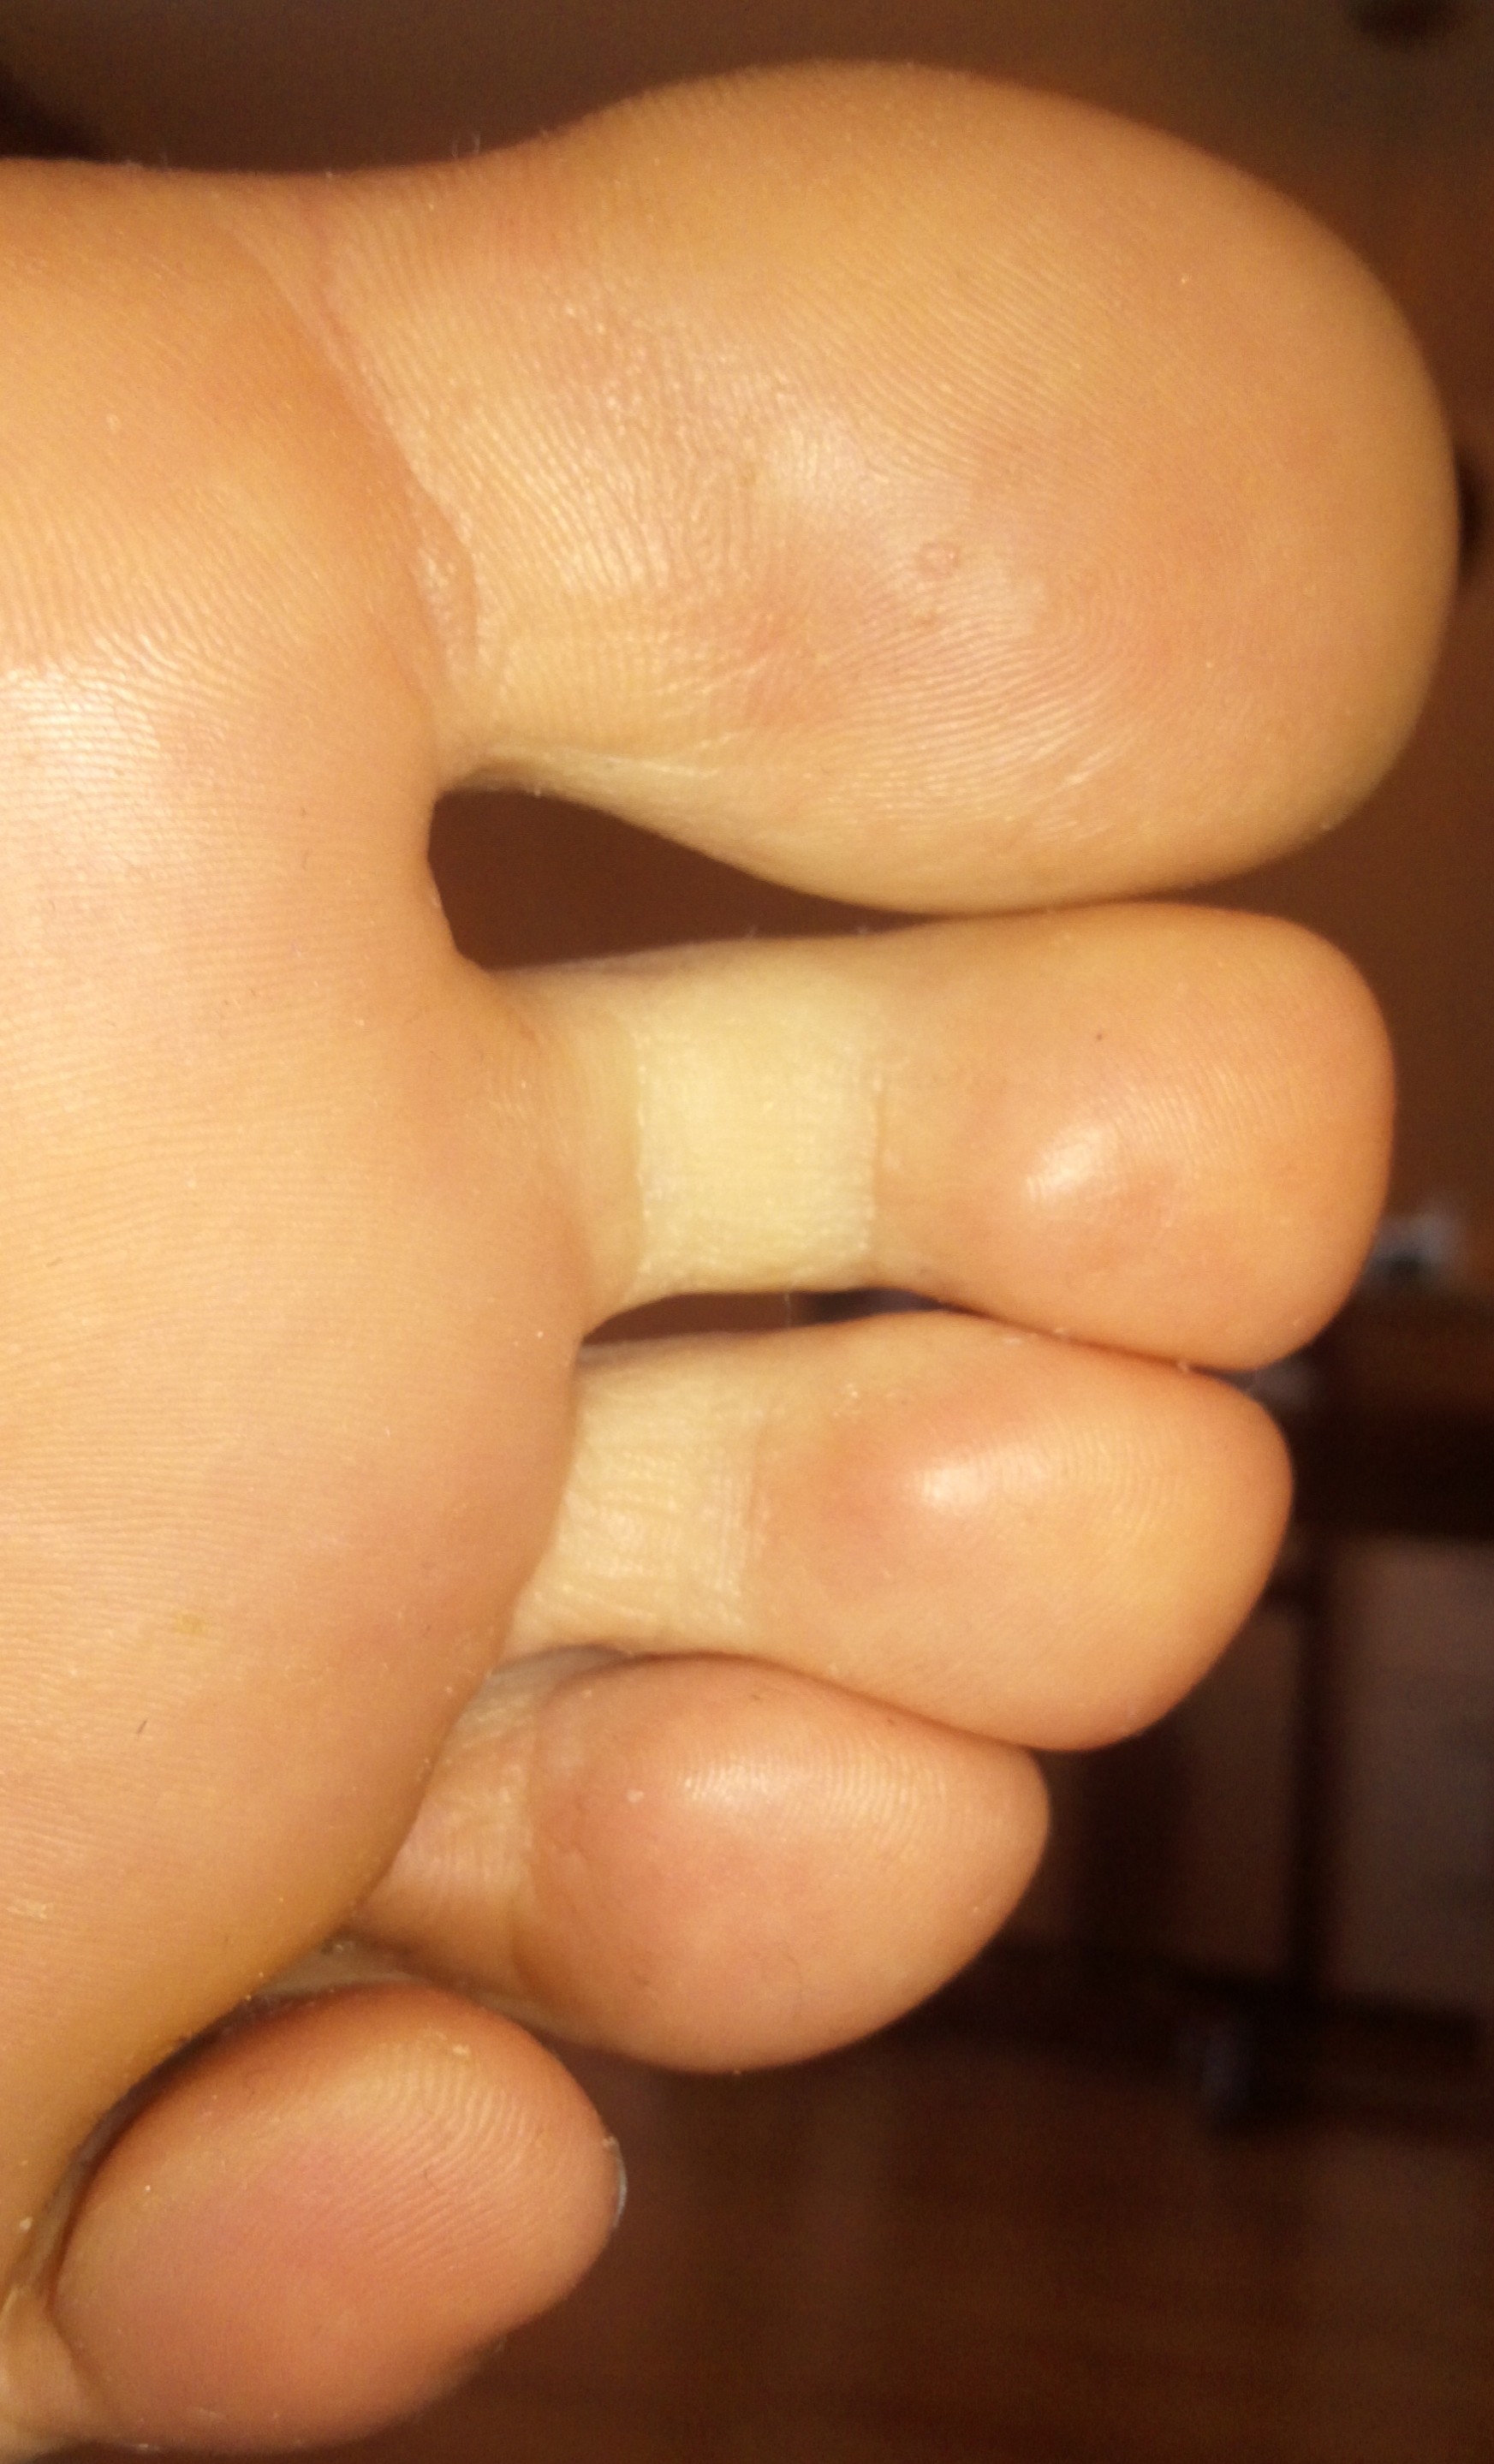 feet-toes-soles-86-deactivated2:Close up adult photos